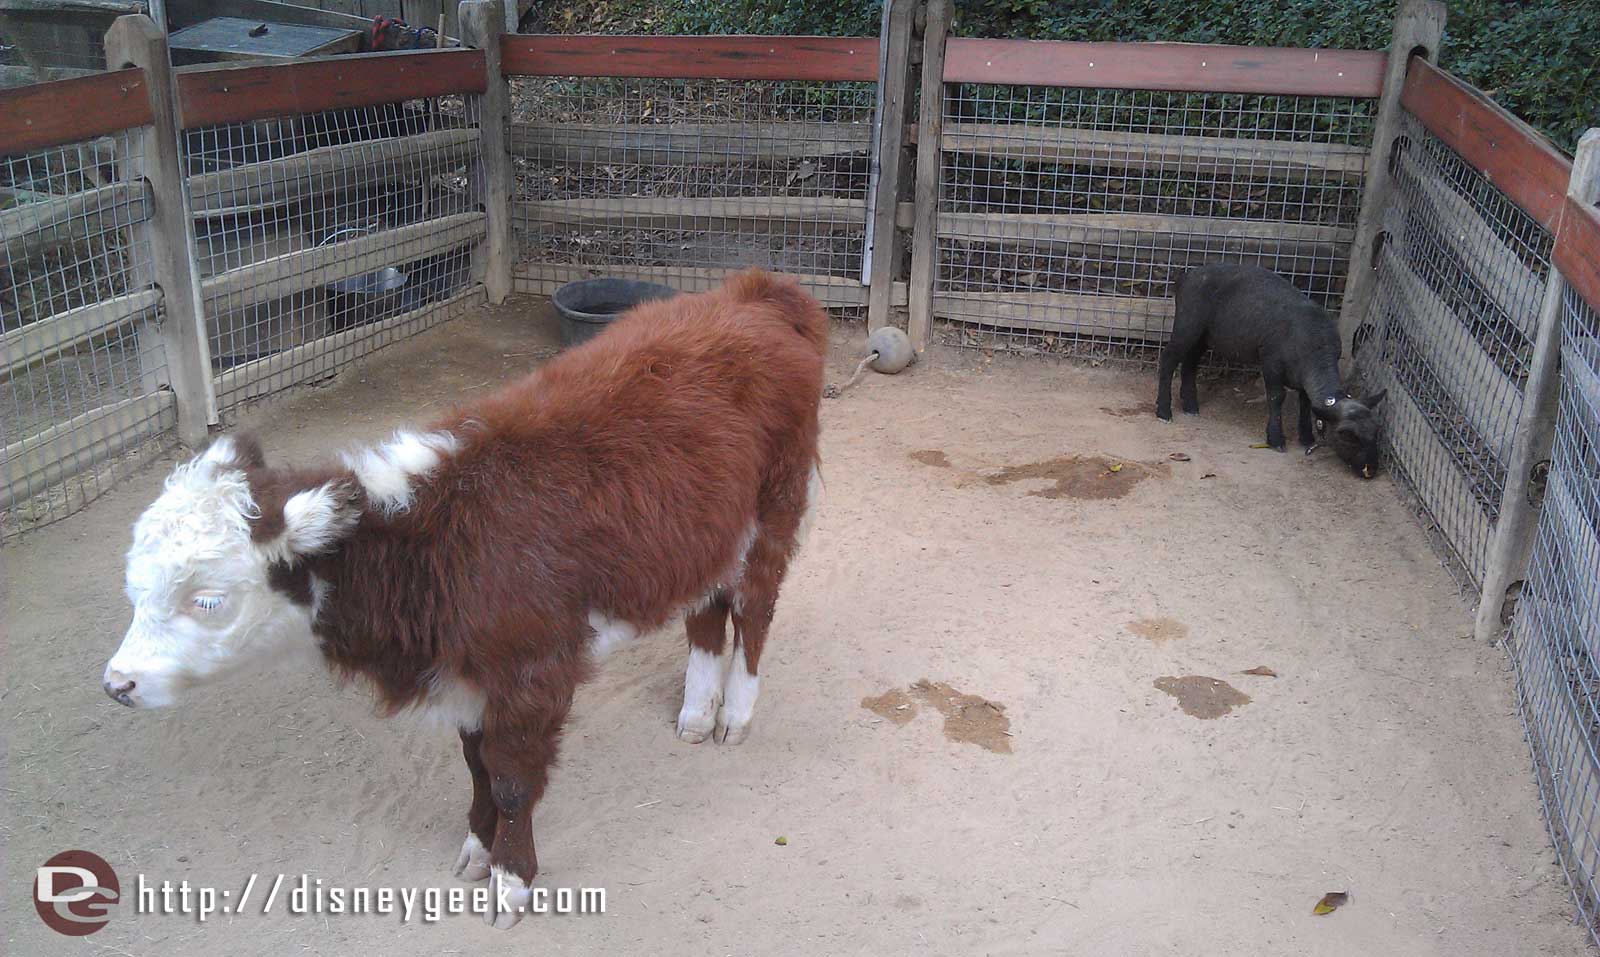 Stop by the Big Thunder Ranch and vote to name the new sheep and calf.